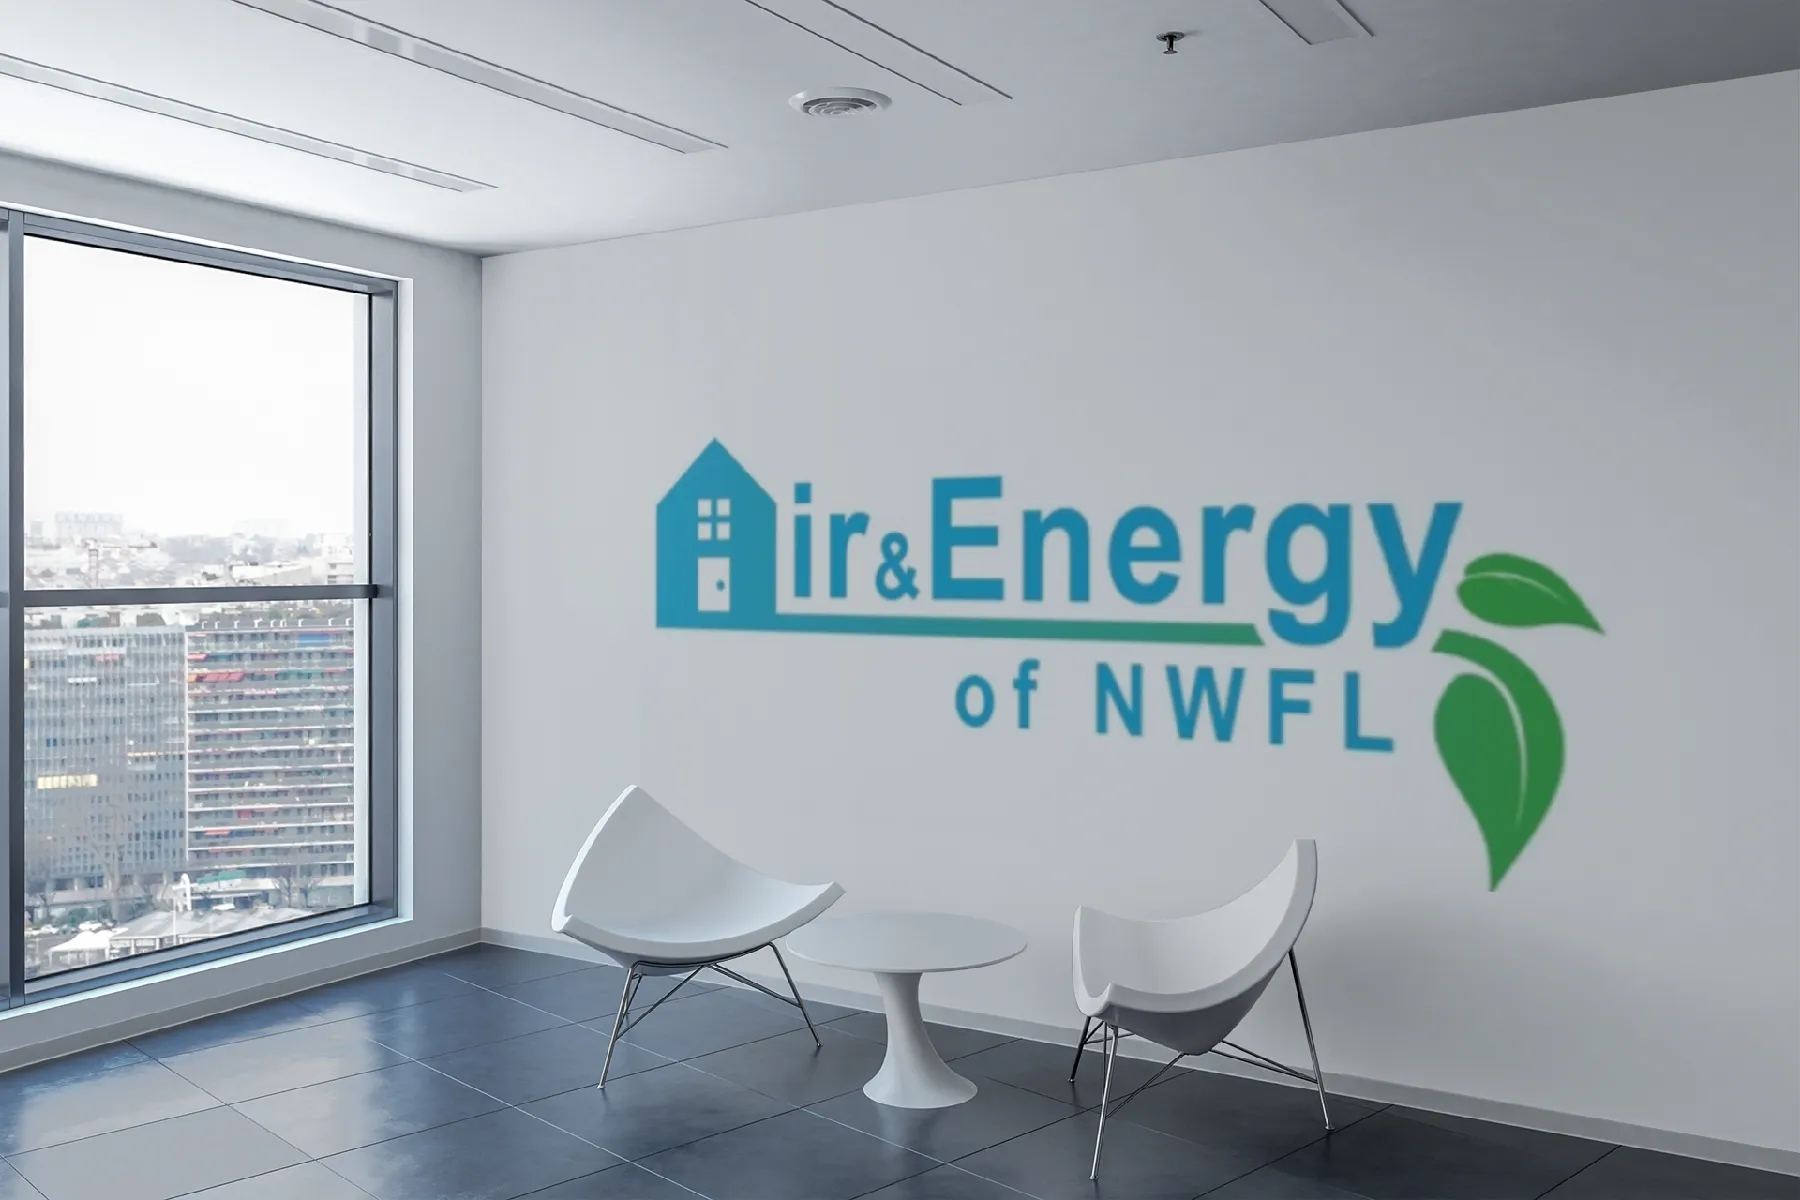 Air and Energy of NWFL logo on an office wall